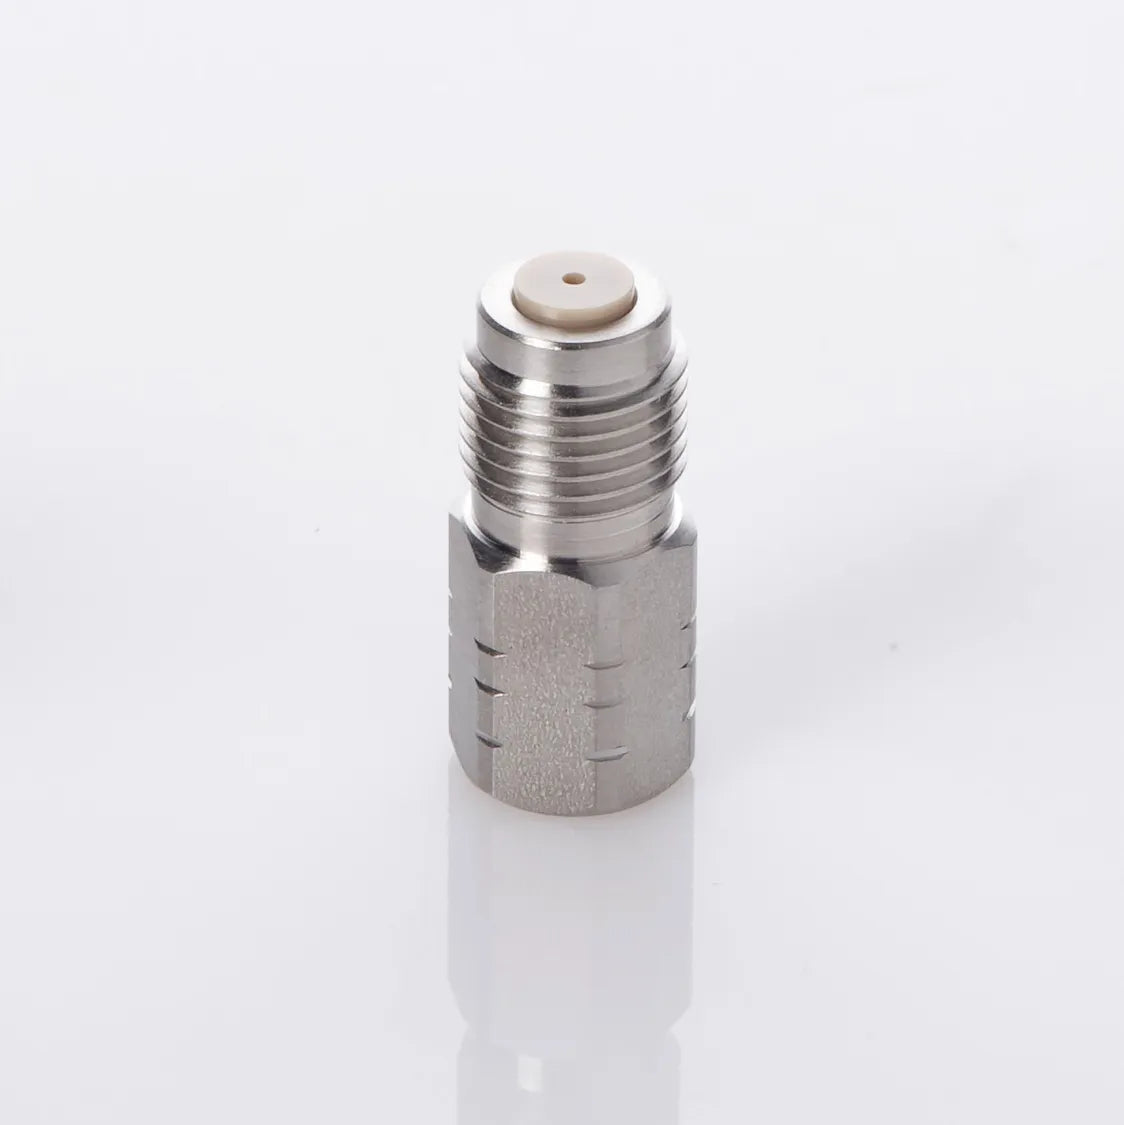 Inlet Check Valve, Comparable to Shimadzu # 228-48249-96 Old# 228-48249-91, 228-45704-91, 228-45557-91